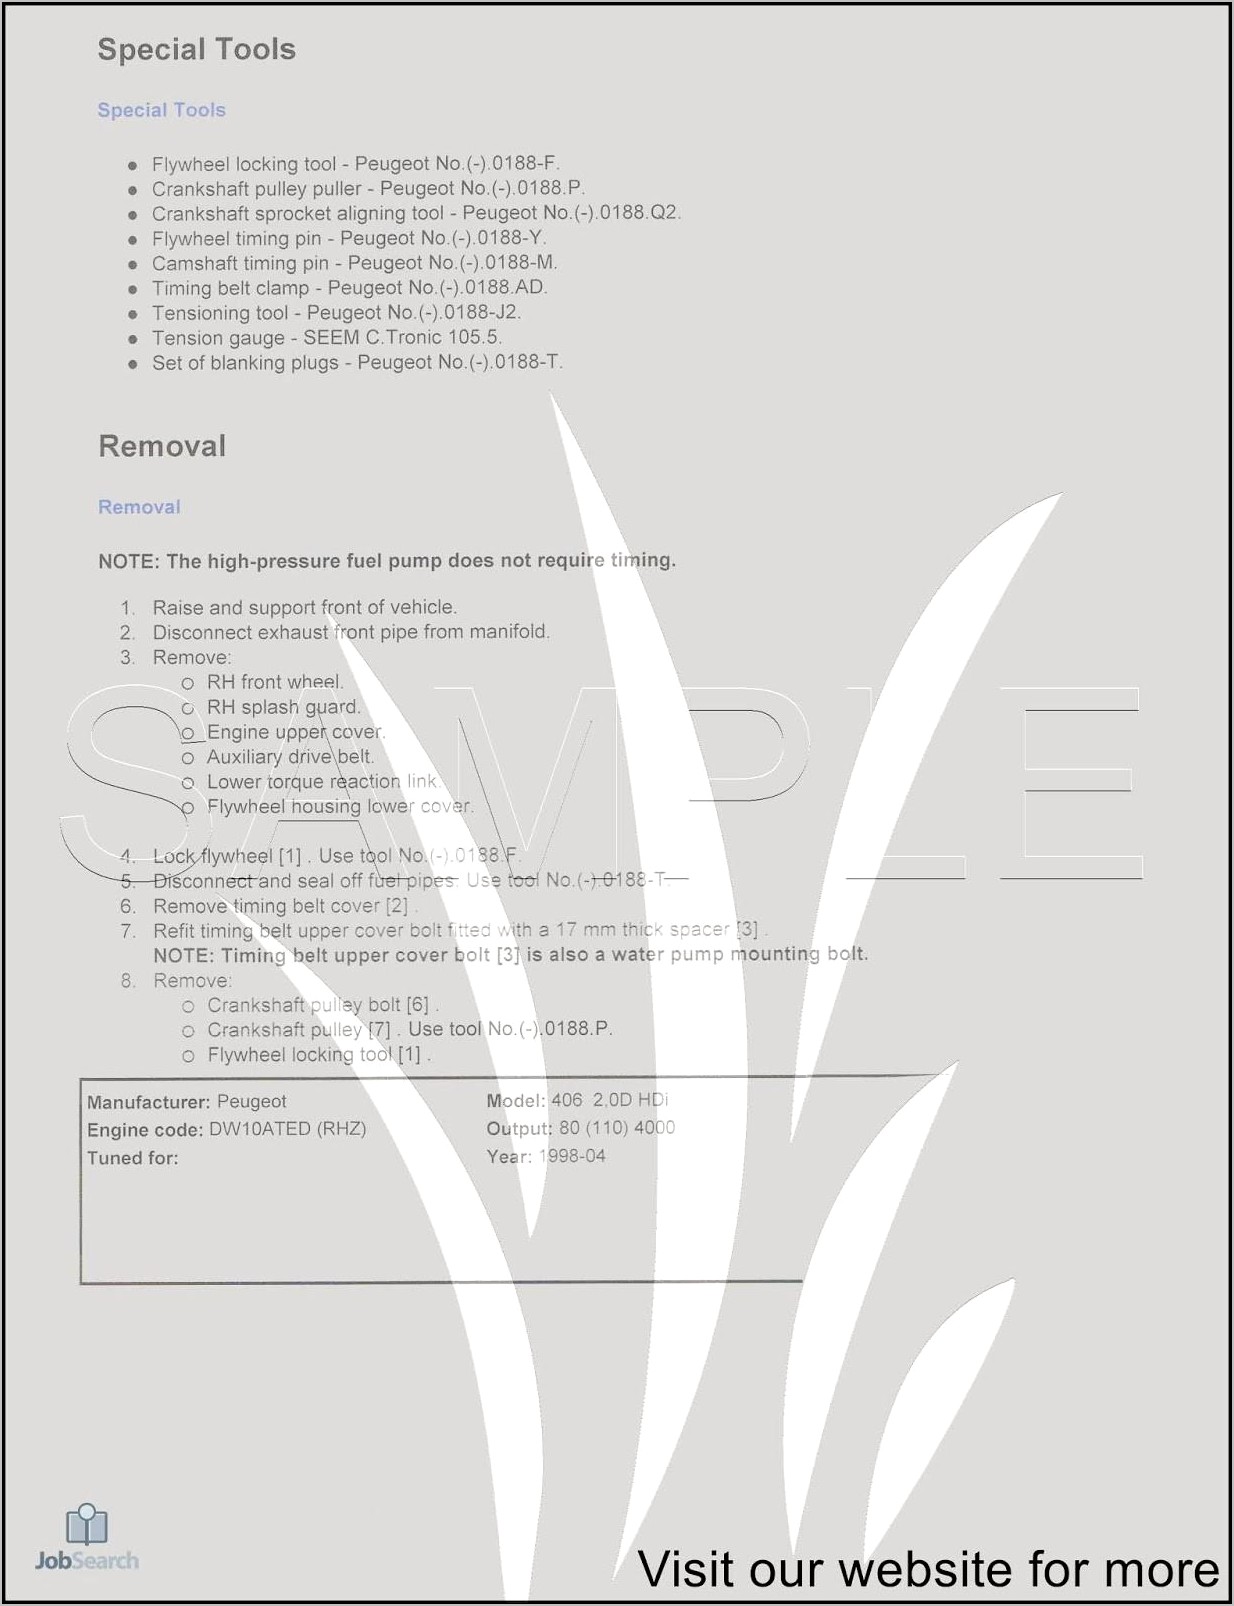 Images Of Sample Of A Simple Resume